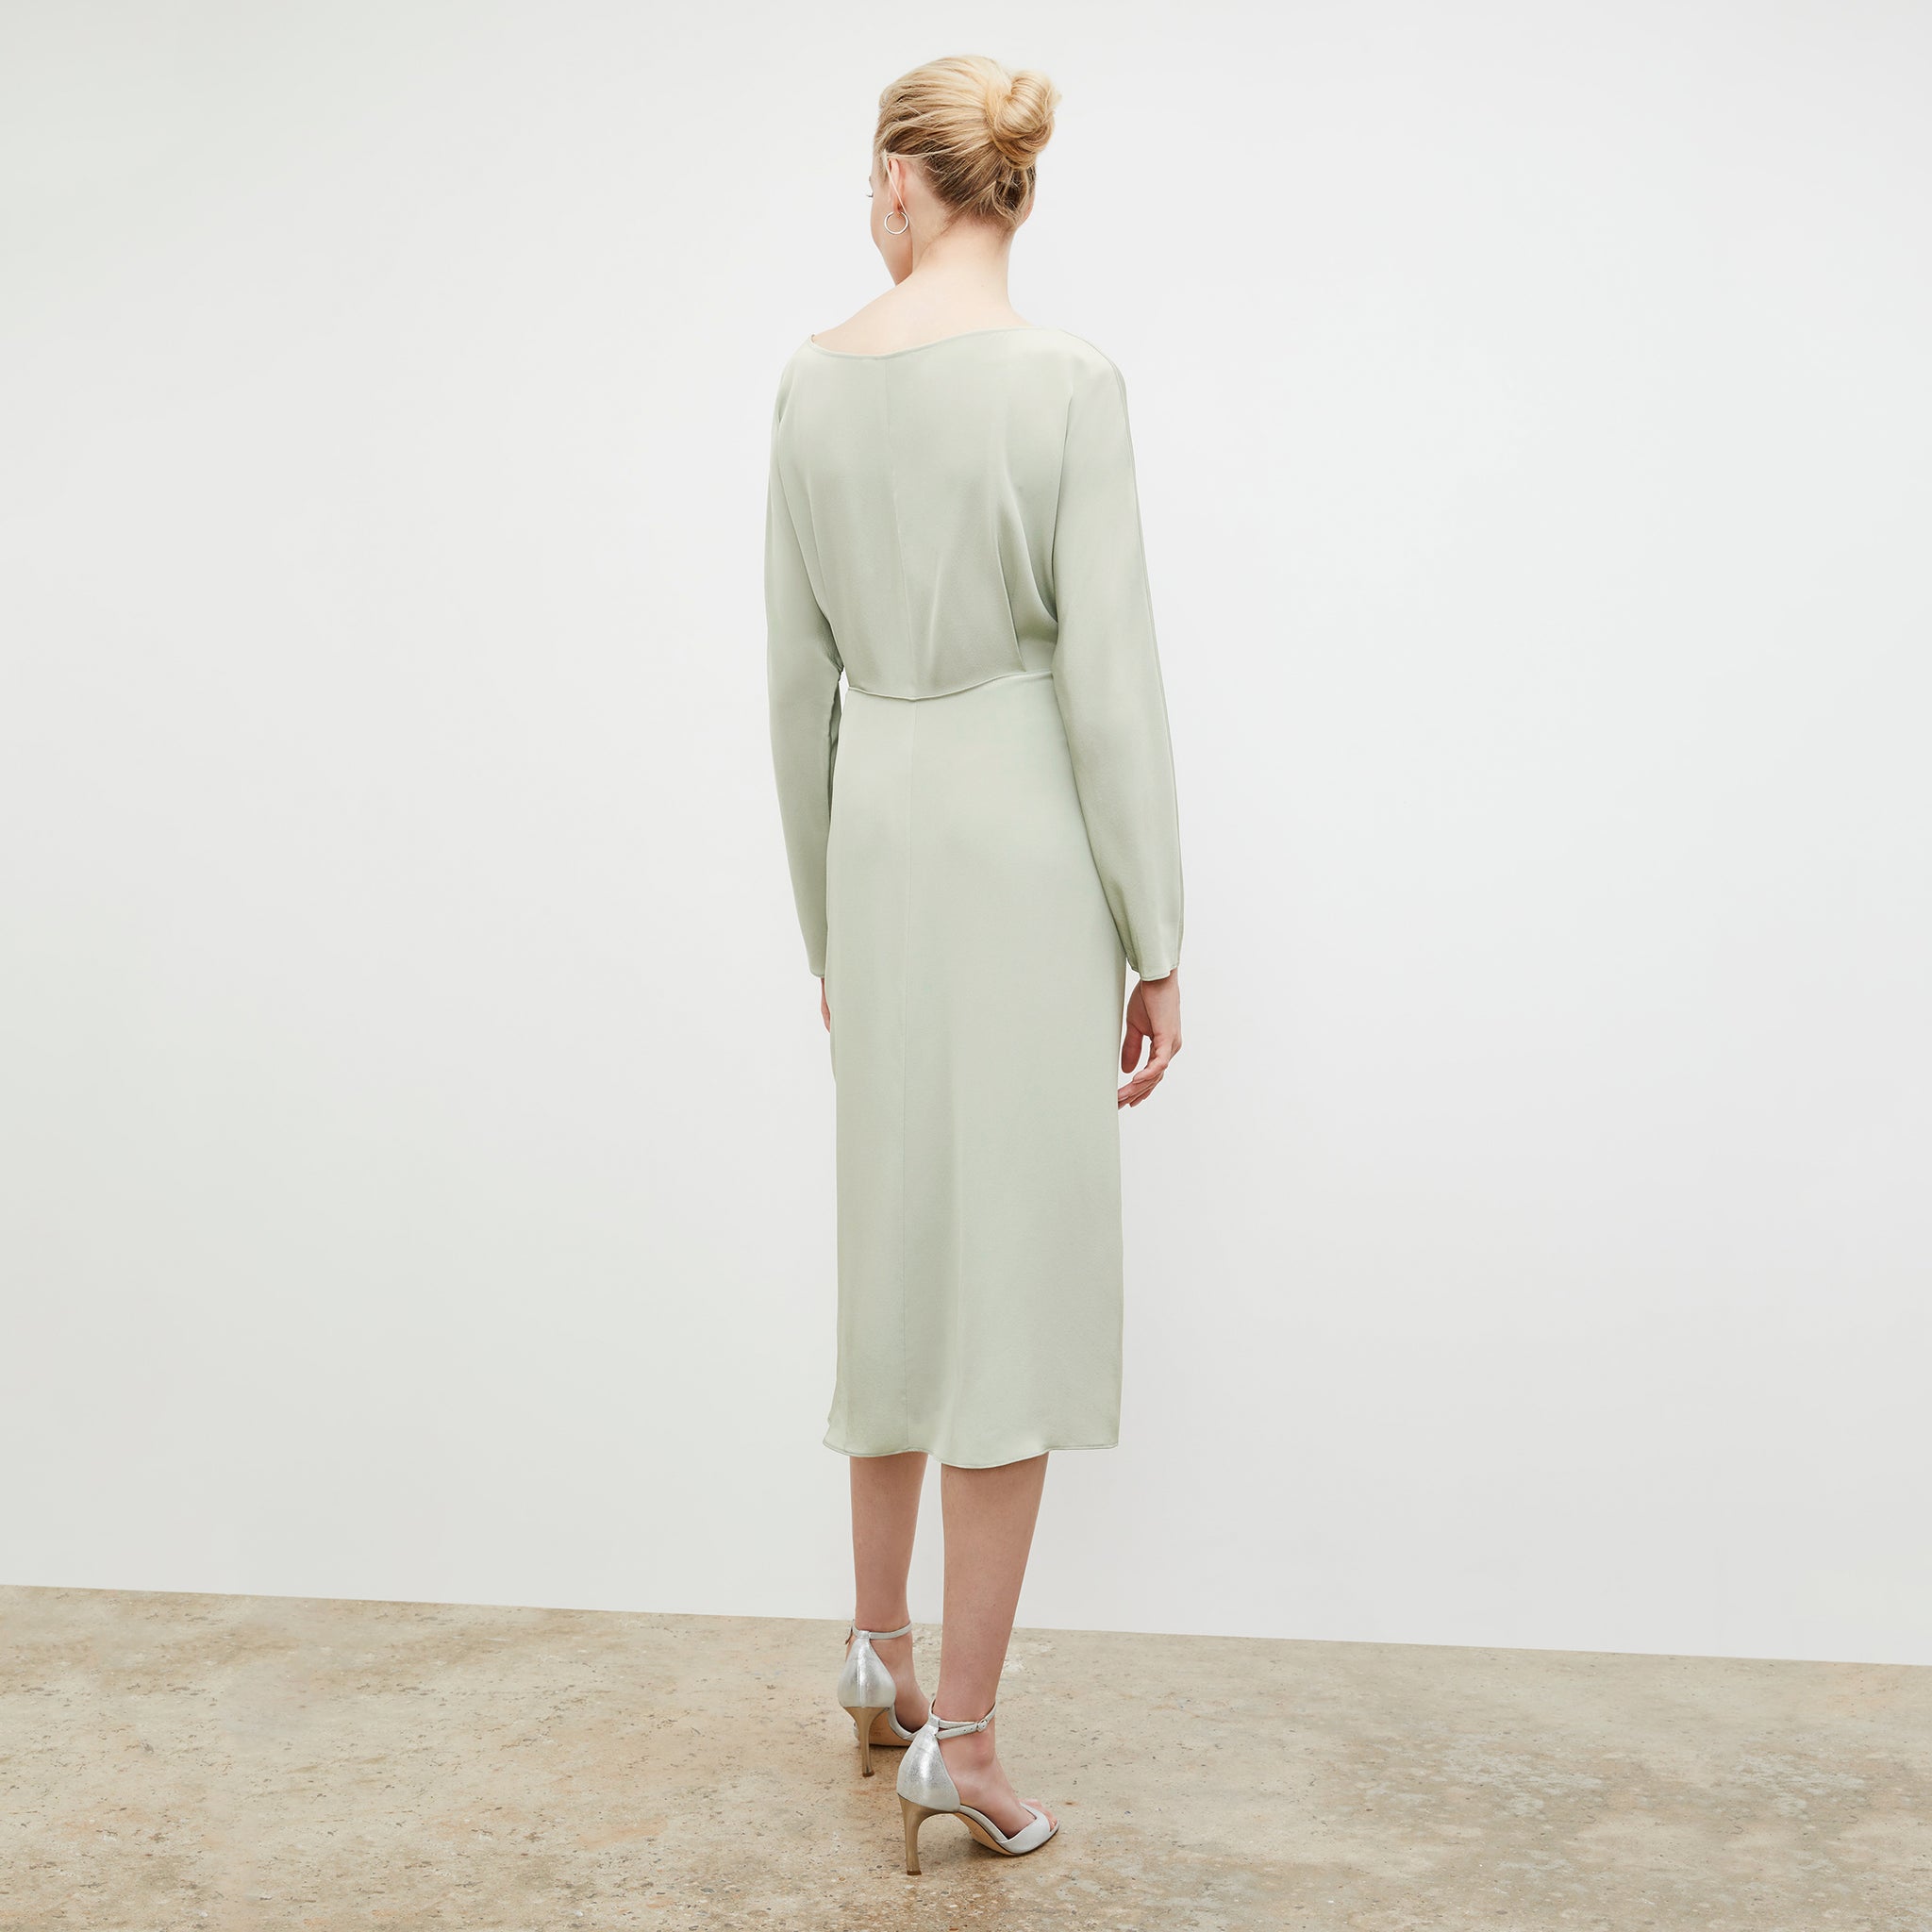 Back image of a woman wearing the Rashmeen dress in Minty Green